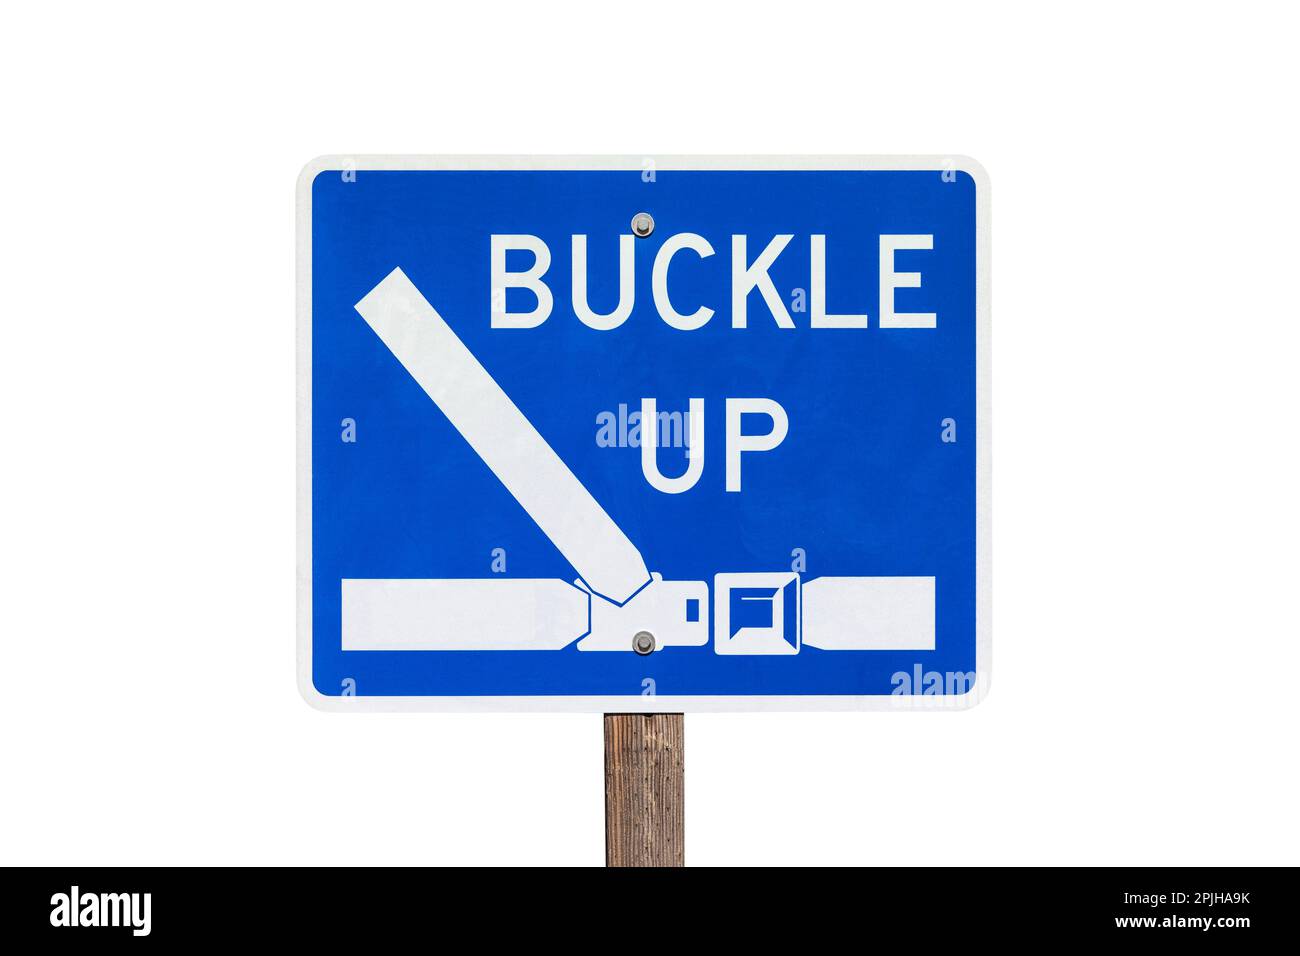 Buckle up highway safety sign isolated with cut out background. Stock Photo